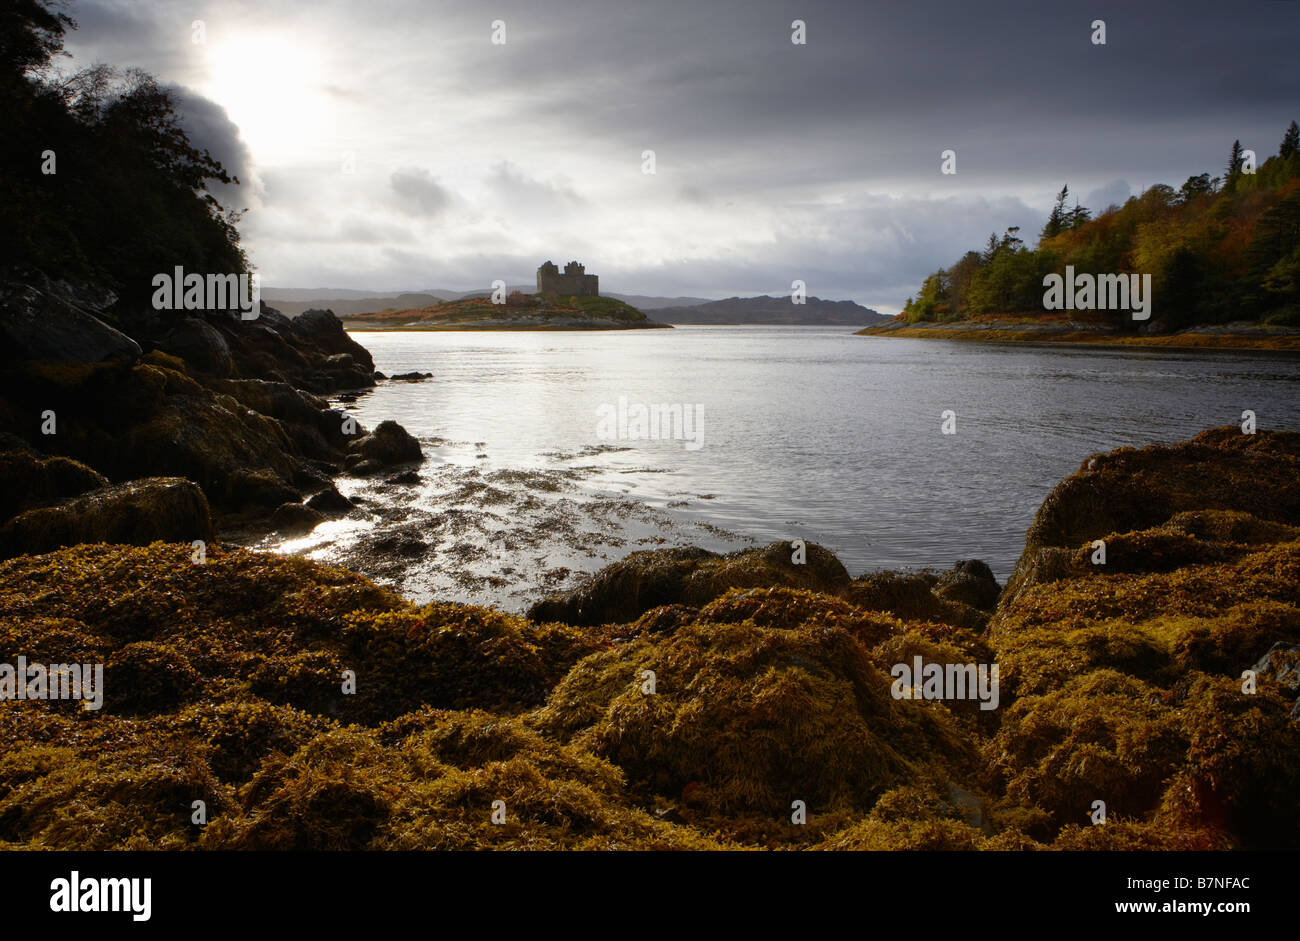 View across Loch Moidart to Castle Tioram rocks covered in seaweed in foreground Highlands Scotland Stock Photo